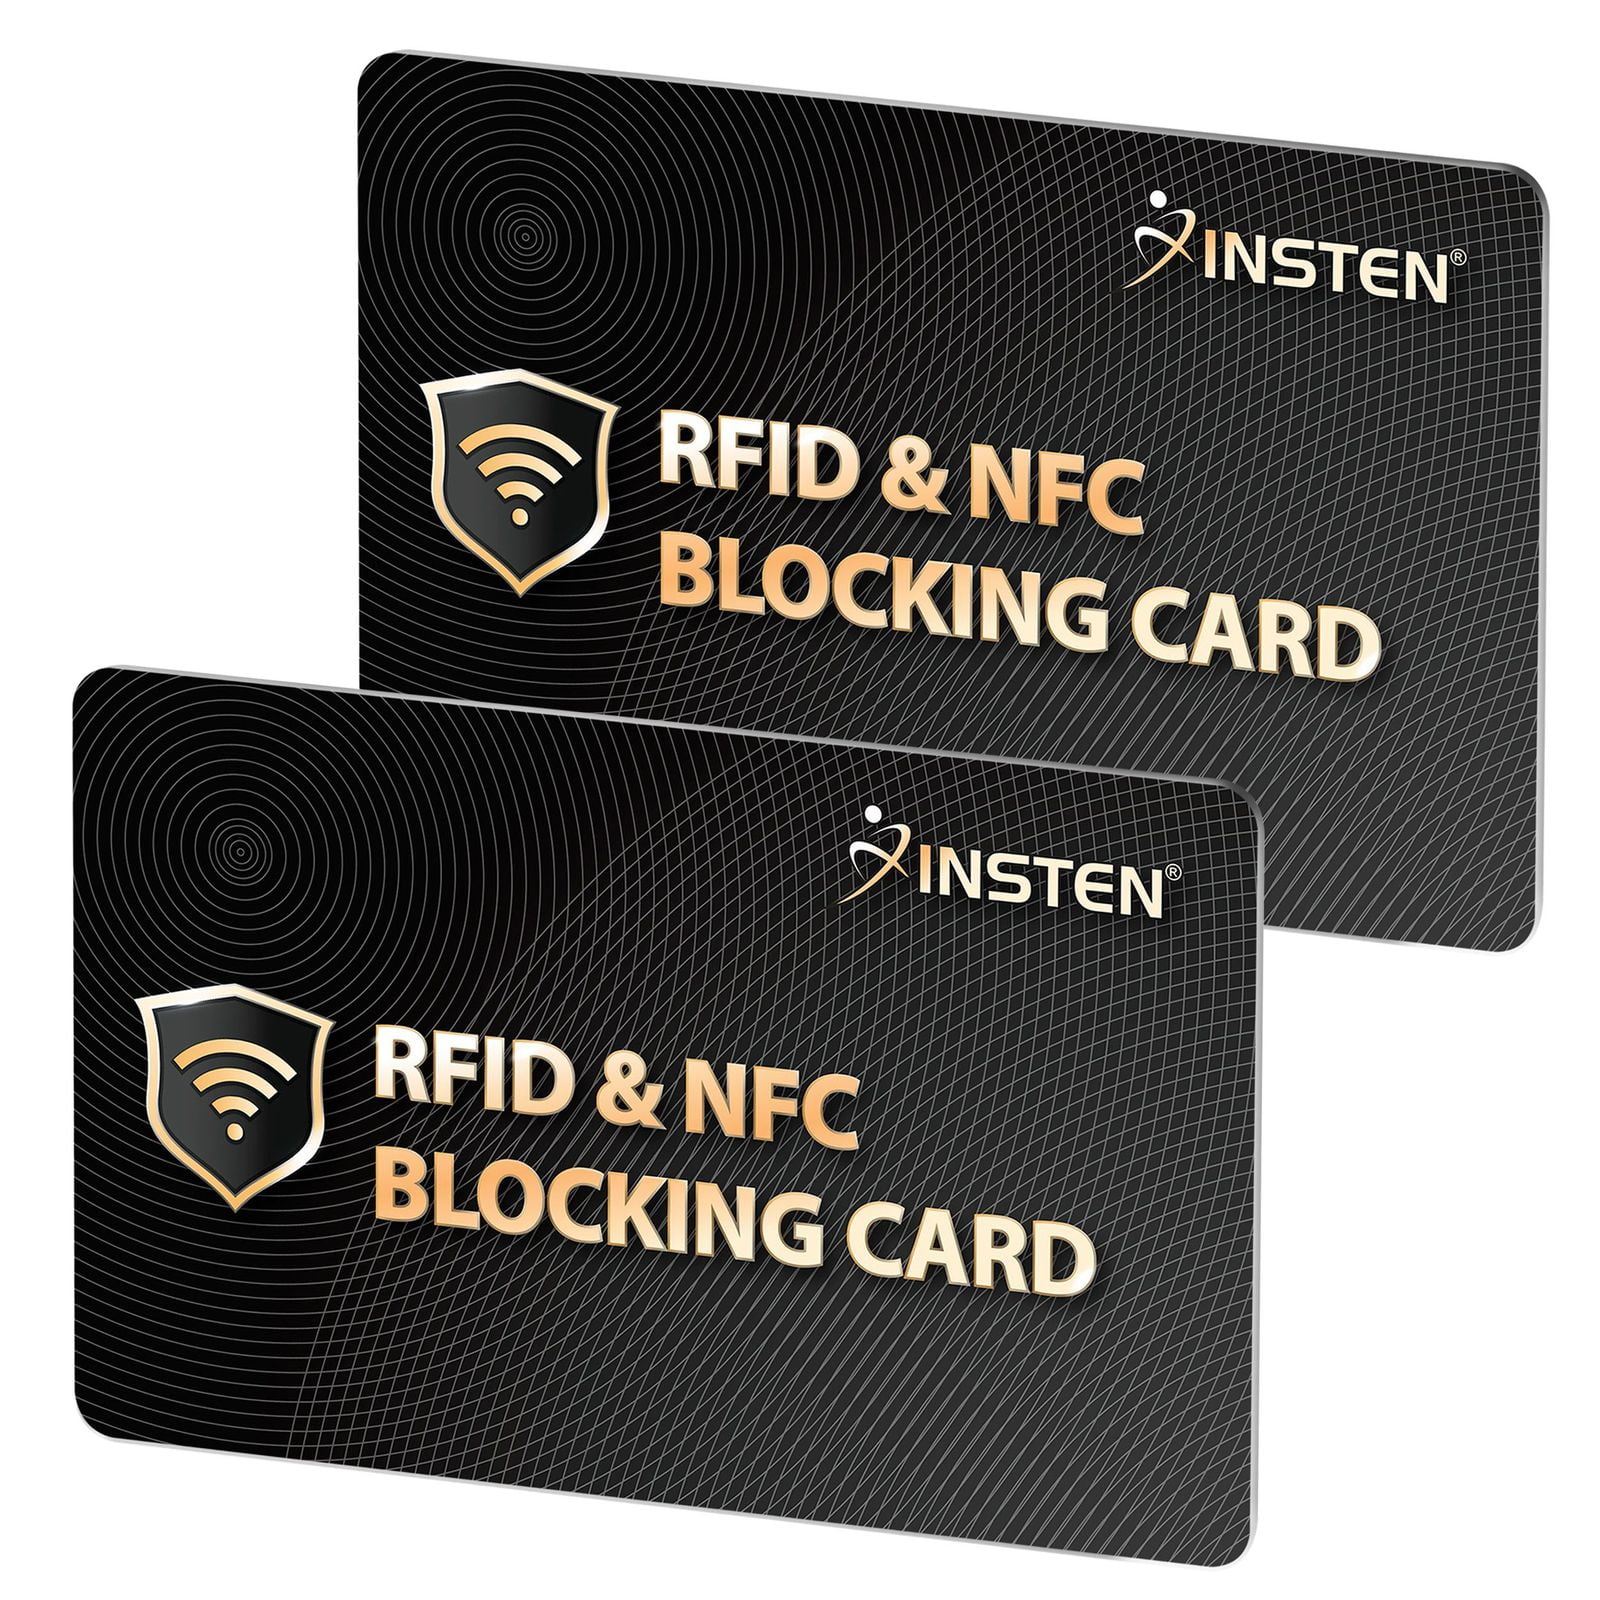 1 RFID/NFC Protector Card Will Block Entire Wallet From Signals Debit Credit Card Protector RFID Blocking Card